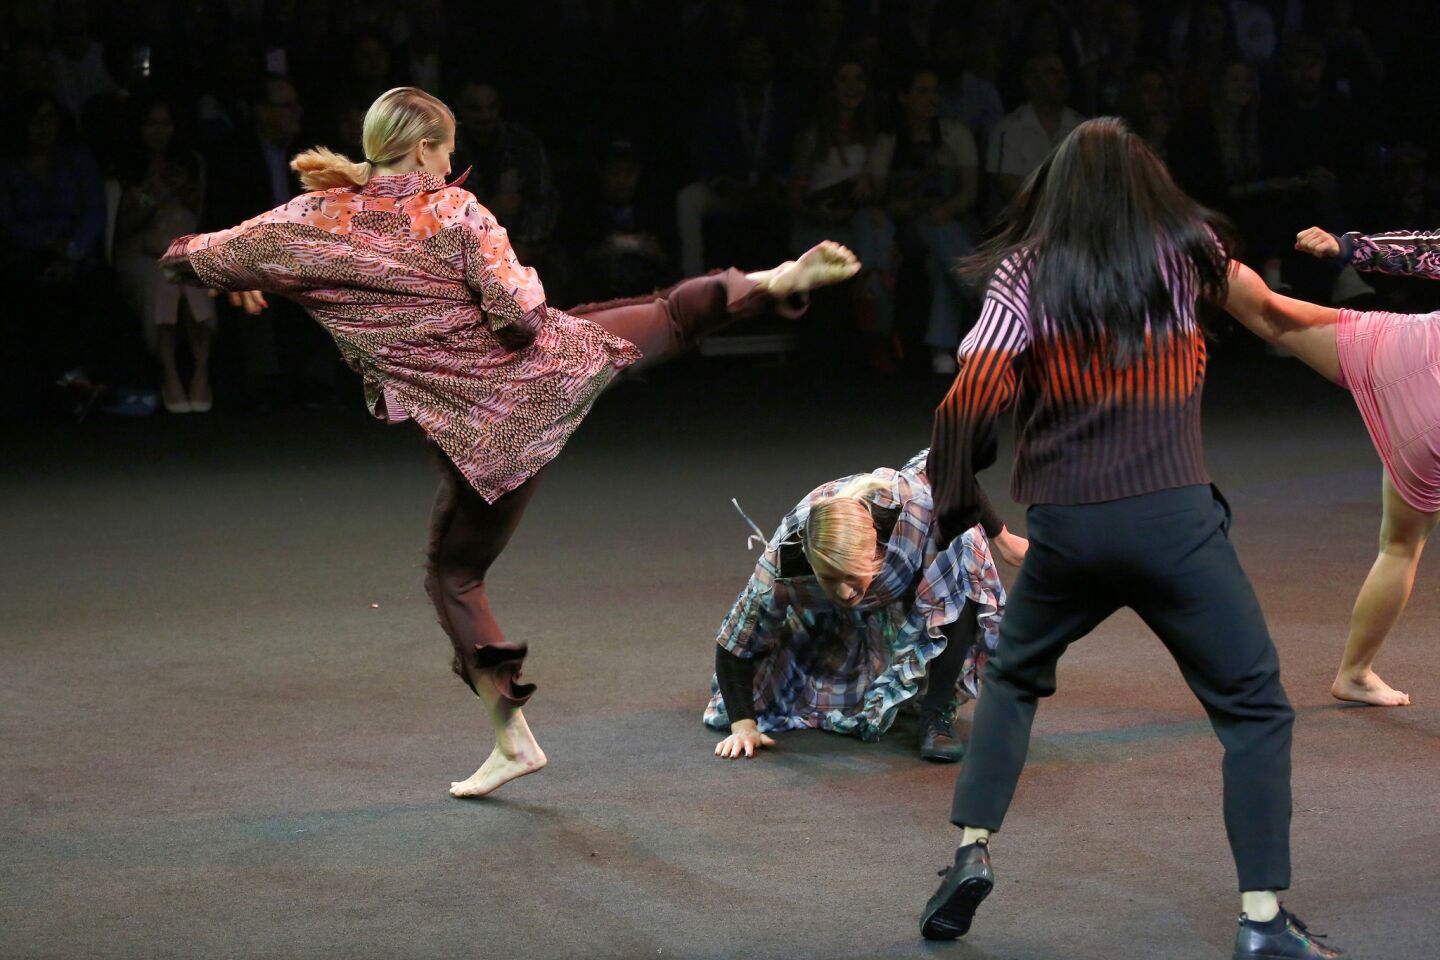 The finale of the Opening Ceremony show included a carefully orchestrated martial arts fight that paid homage to both powerful women and the designers' heritage.